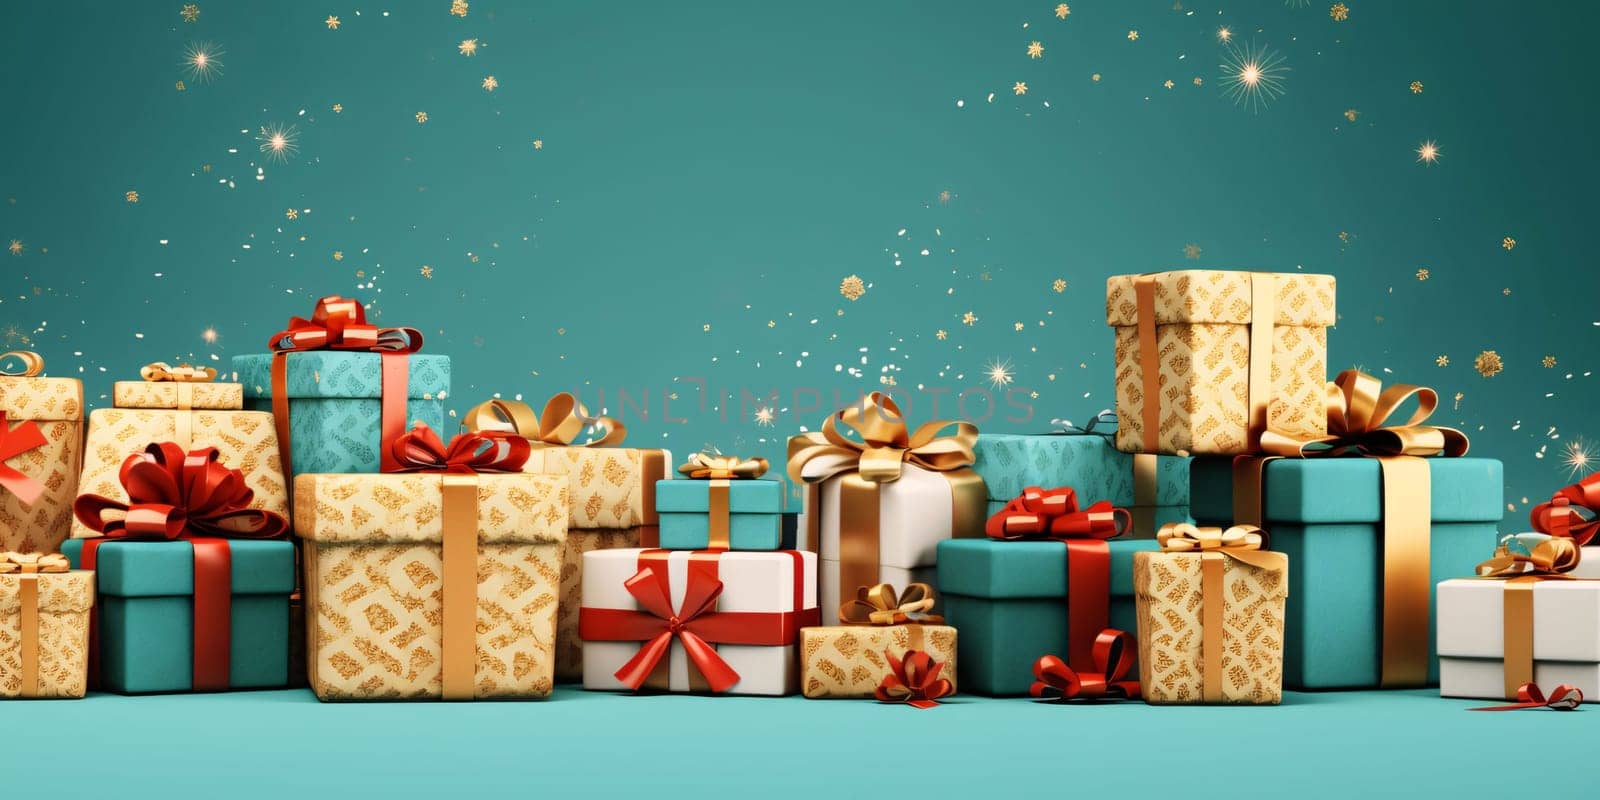 Banner: 3D render of Christmas gifts with ribbons on green background.